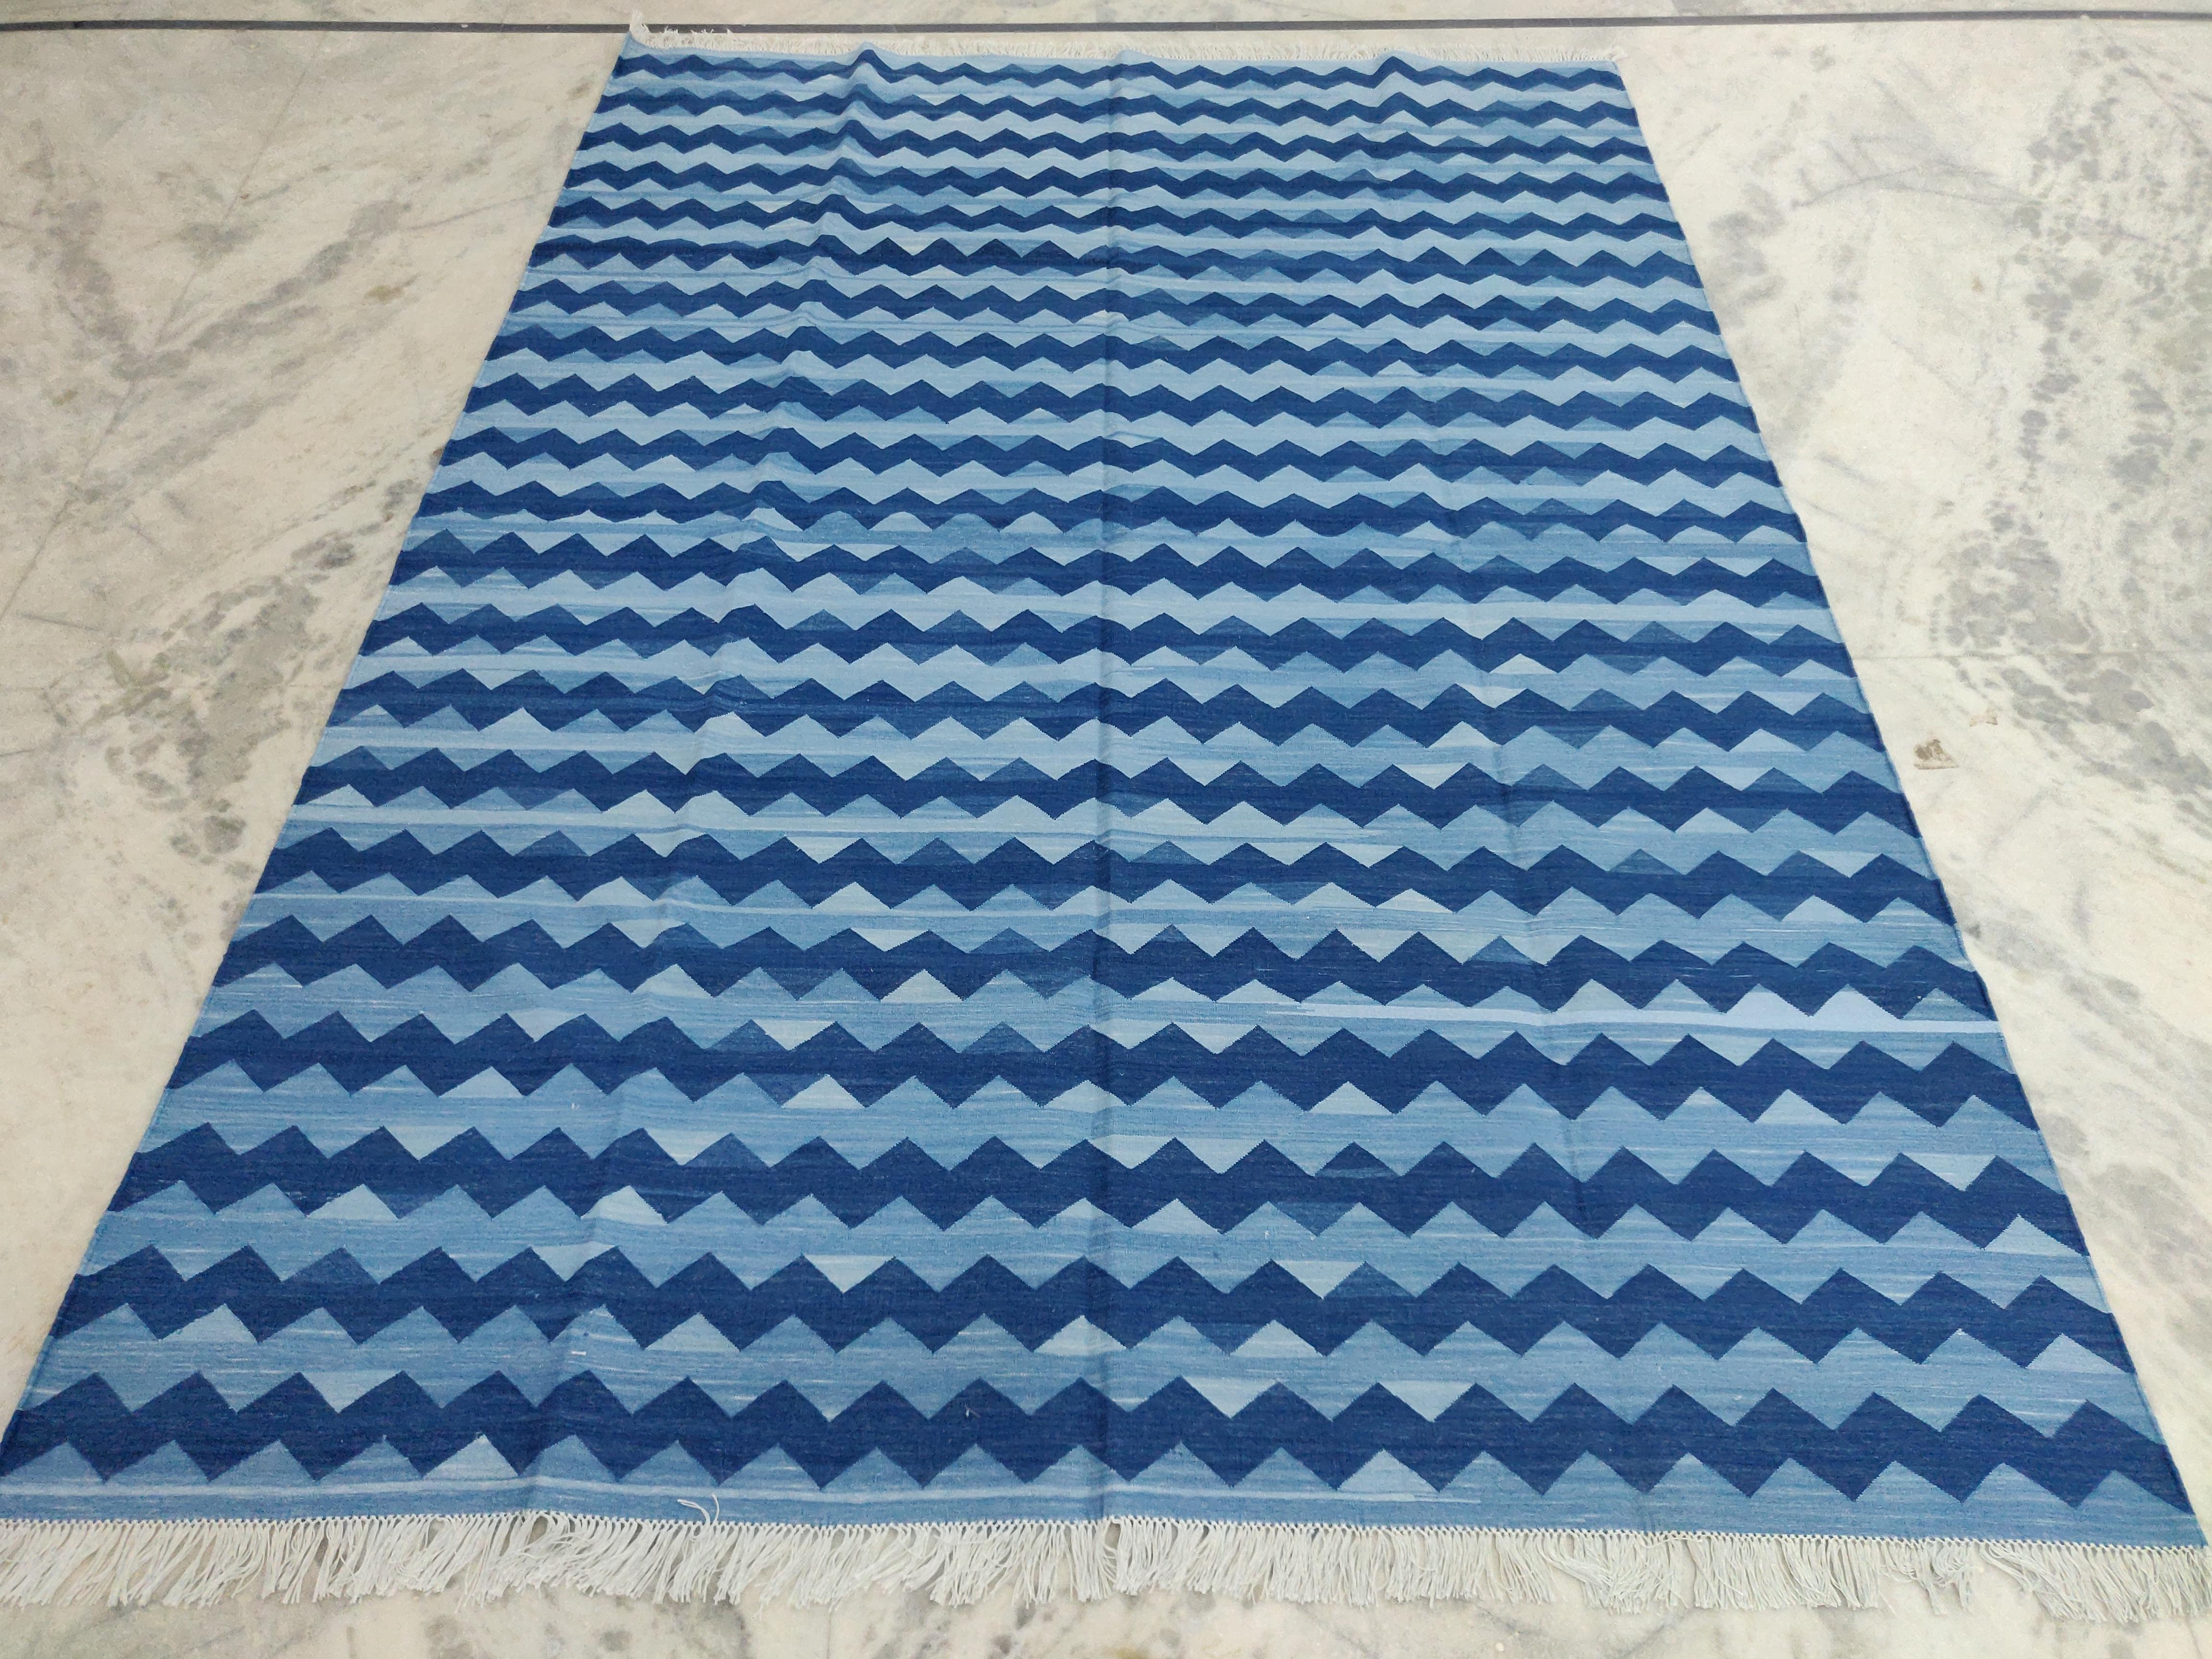 Mid-Century Modern Handmade Cotton Area Flat Weave Rug, 6x9 Blue Zig Zag Striped Indian Dhurrie Rug For Sale